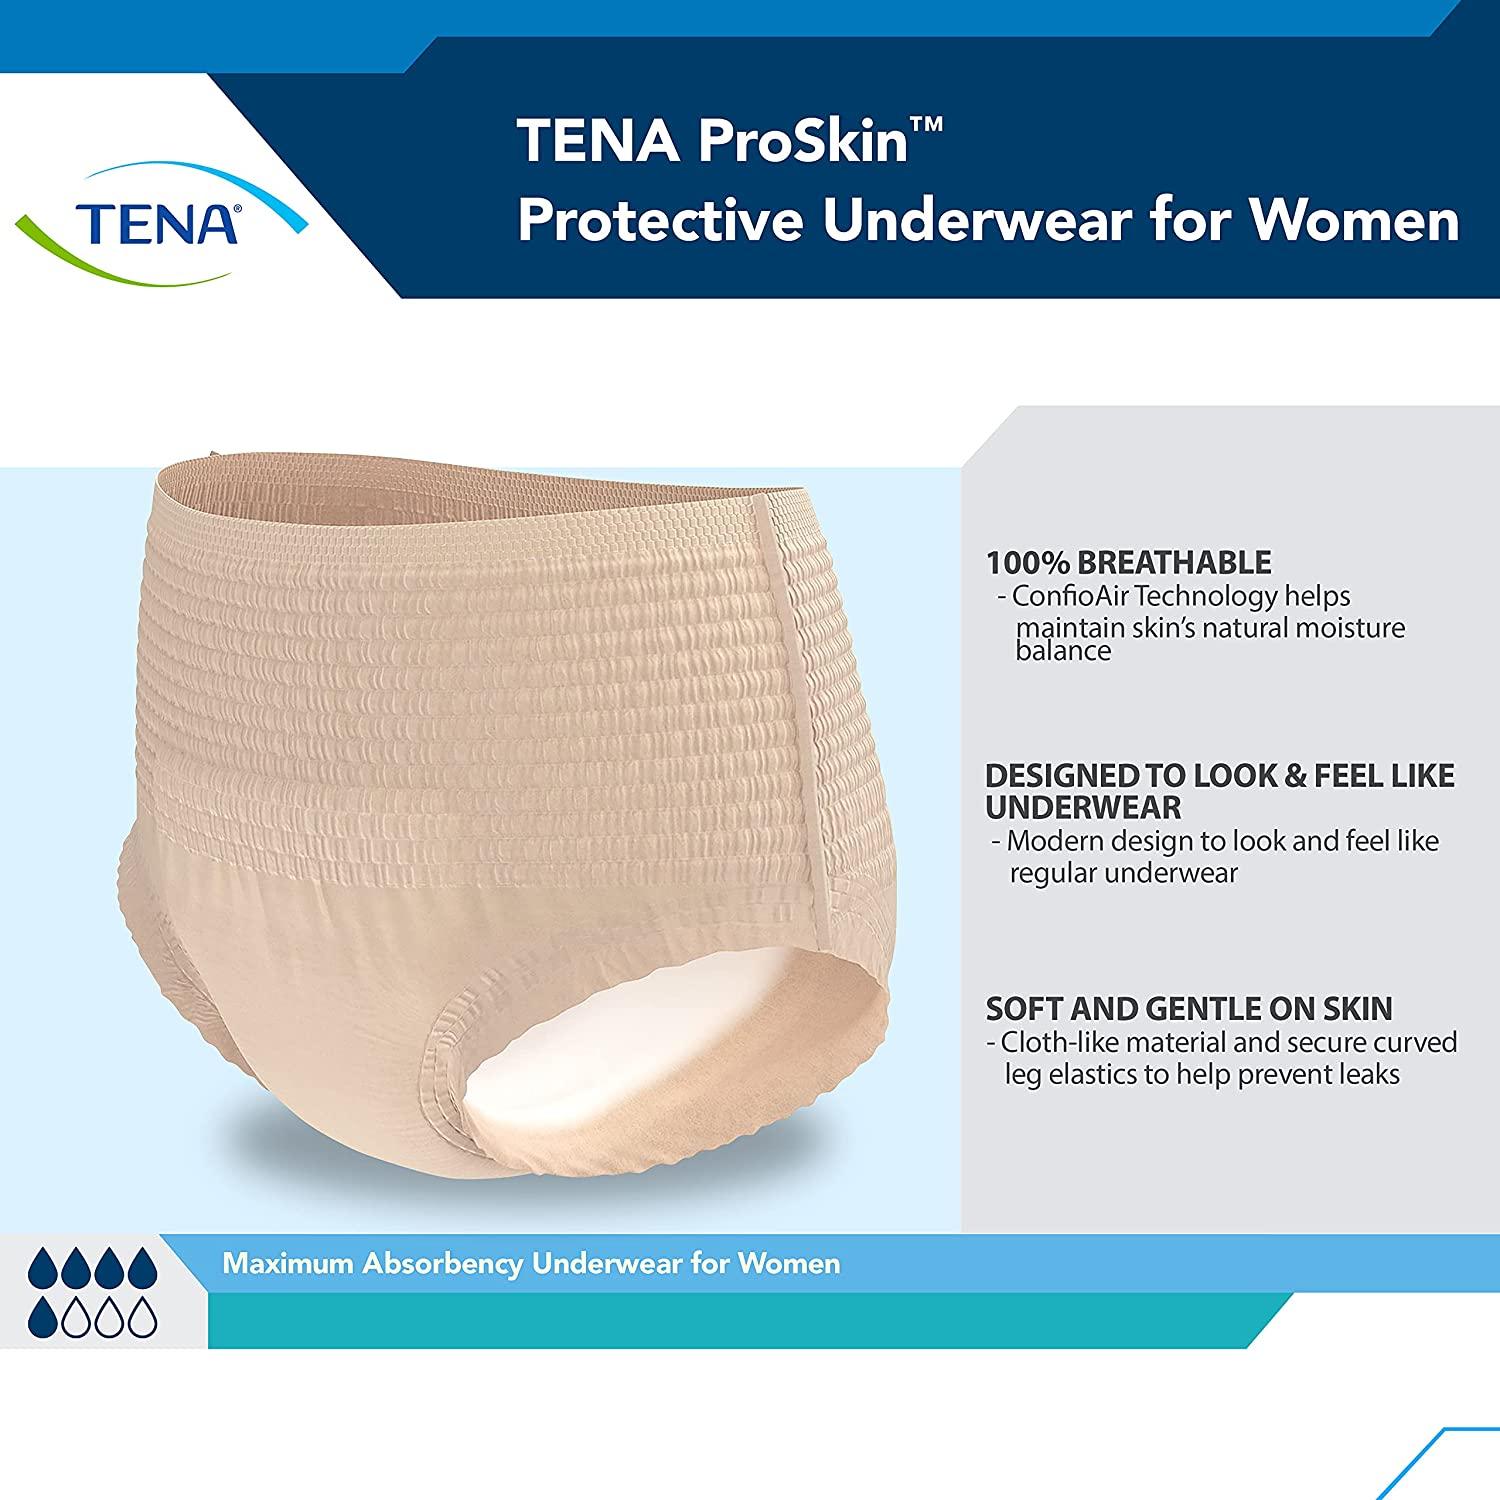 TENA ProSkin Plus  Fully breathable incontinence underwear